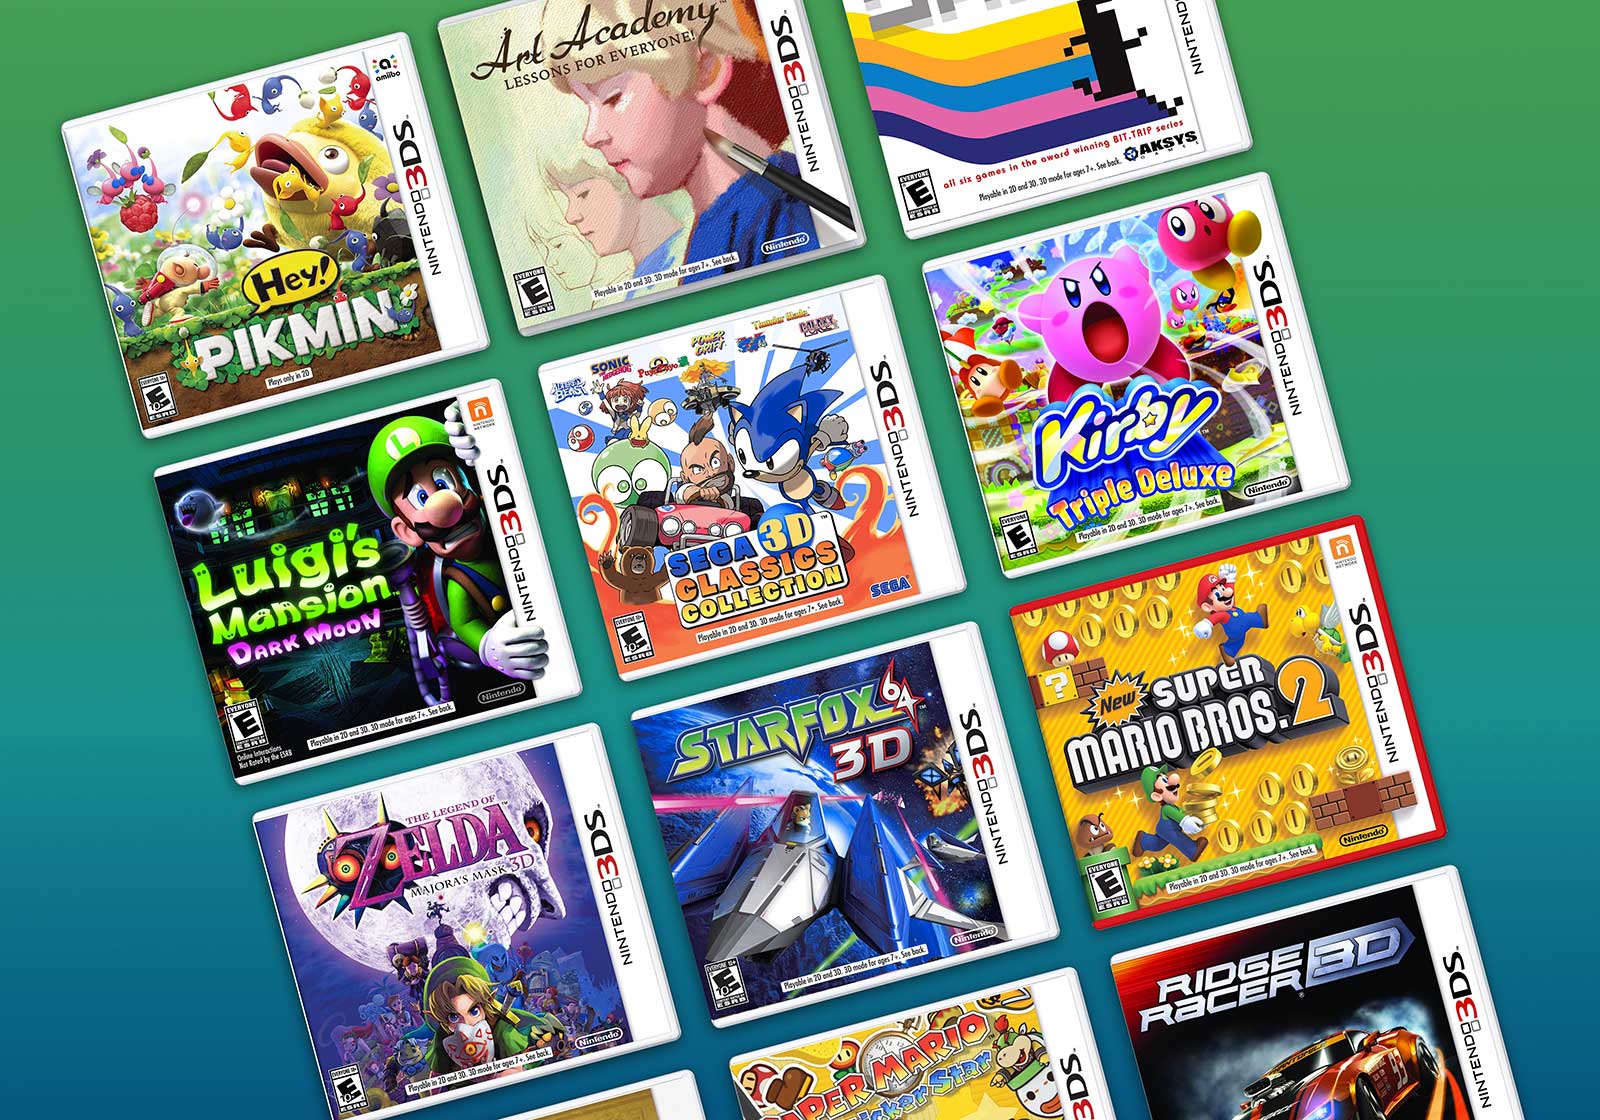 The 3DS Games Under RetroGaming with Racketboy